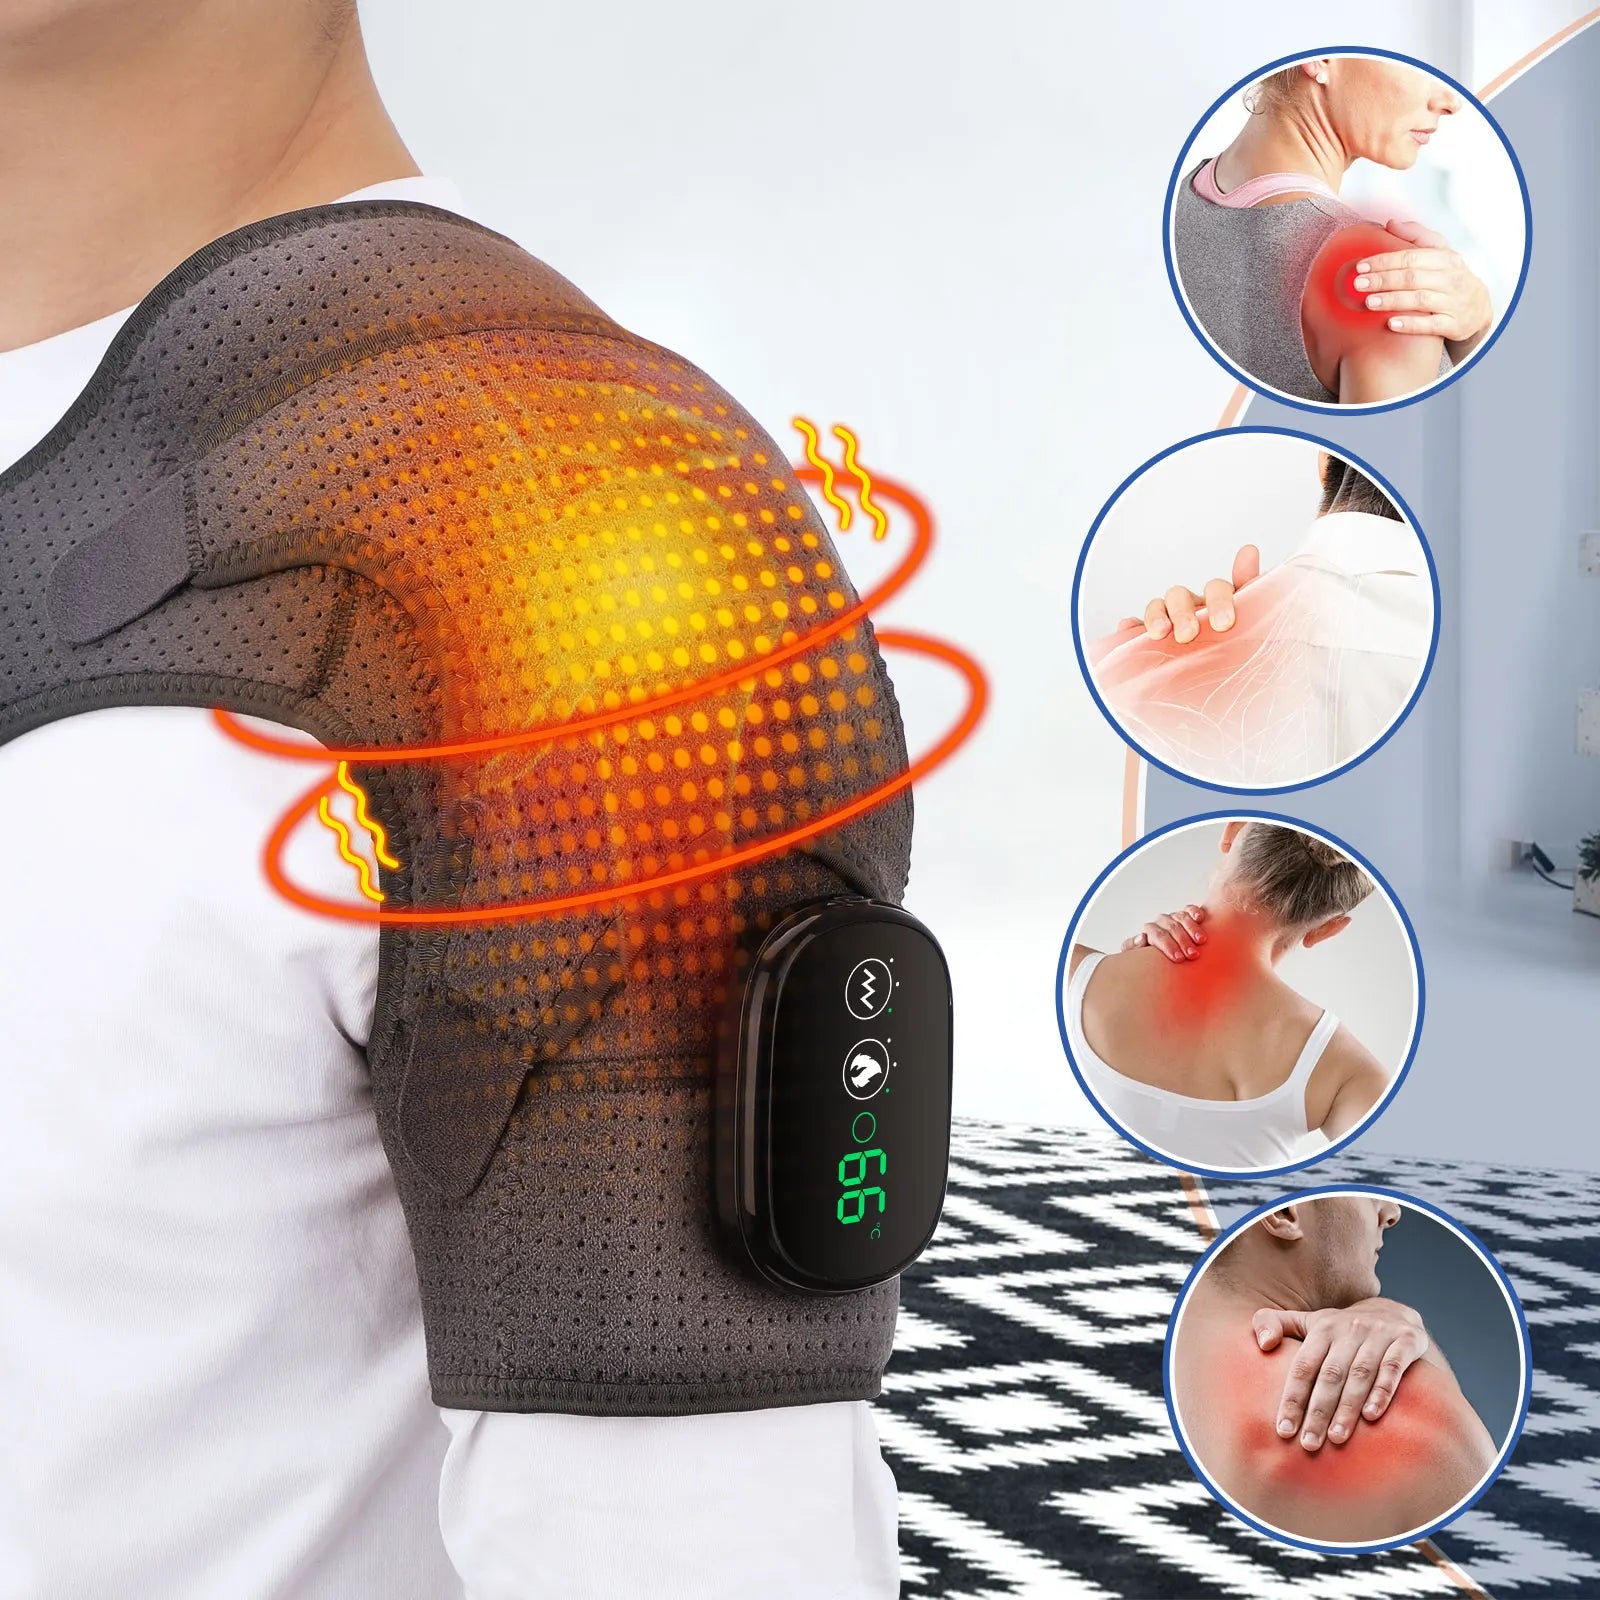 neck and shoulder massager with heat | neck and shoulder massager shiatsu | shoulder massager with heat | neck and shoulder massager homedics | shoulder massager amazon | homedics neck and shoulder massager | neck and shoulder massager brookstone | shoulder massager brookstone | handheld shoulder massager | homedics shoulder massager | comfier neck and shoulder massager | neck and shoulder massager near me